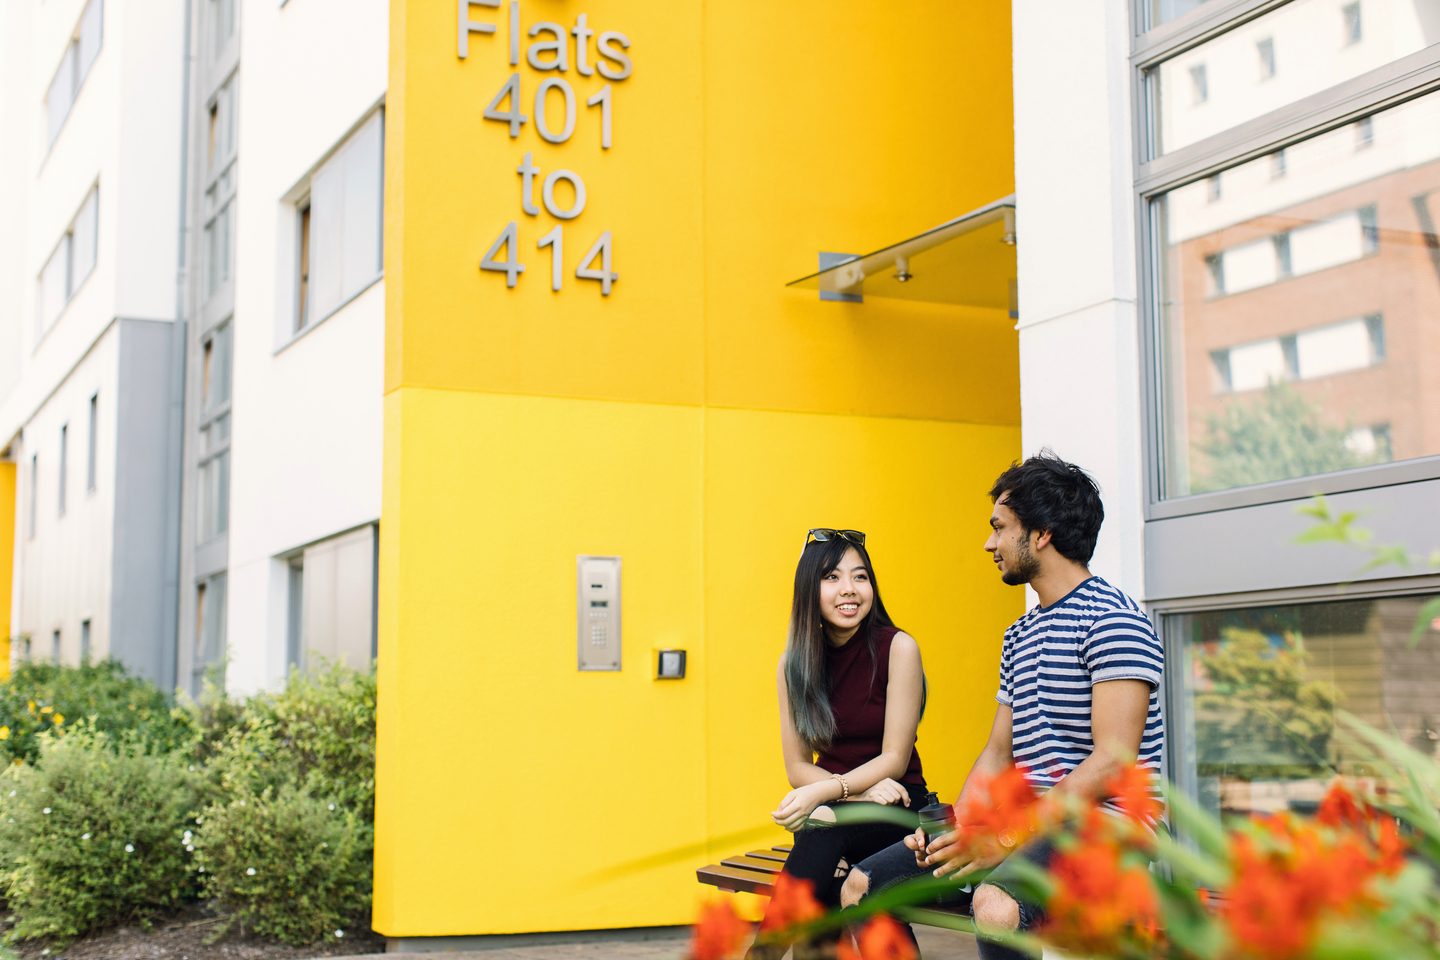 Students sitting on a bench in front of the student dorm